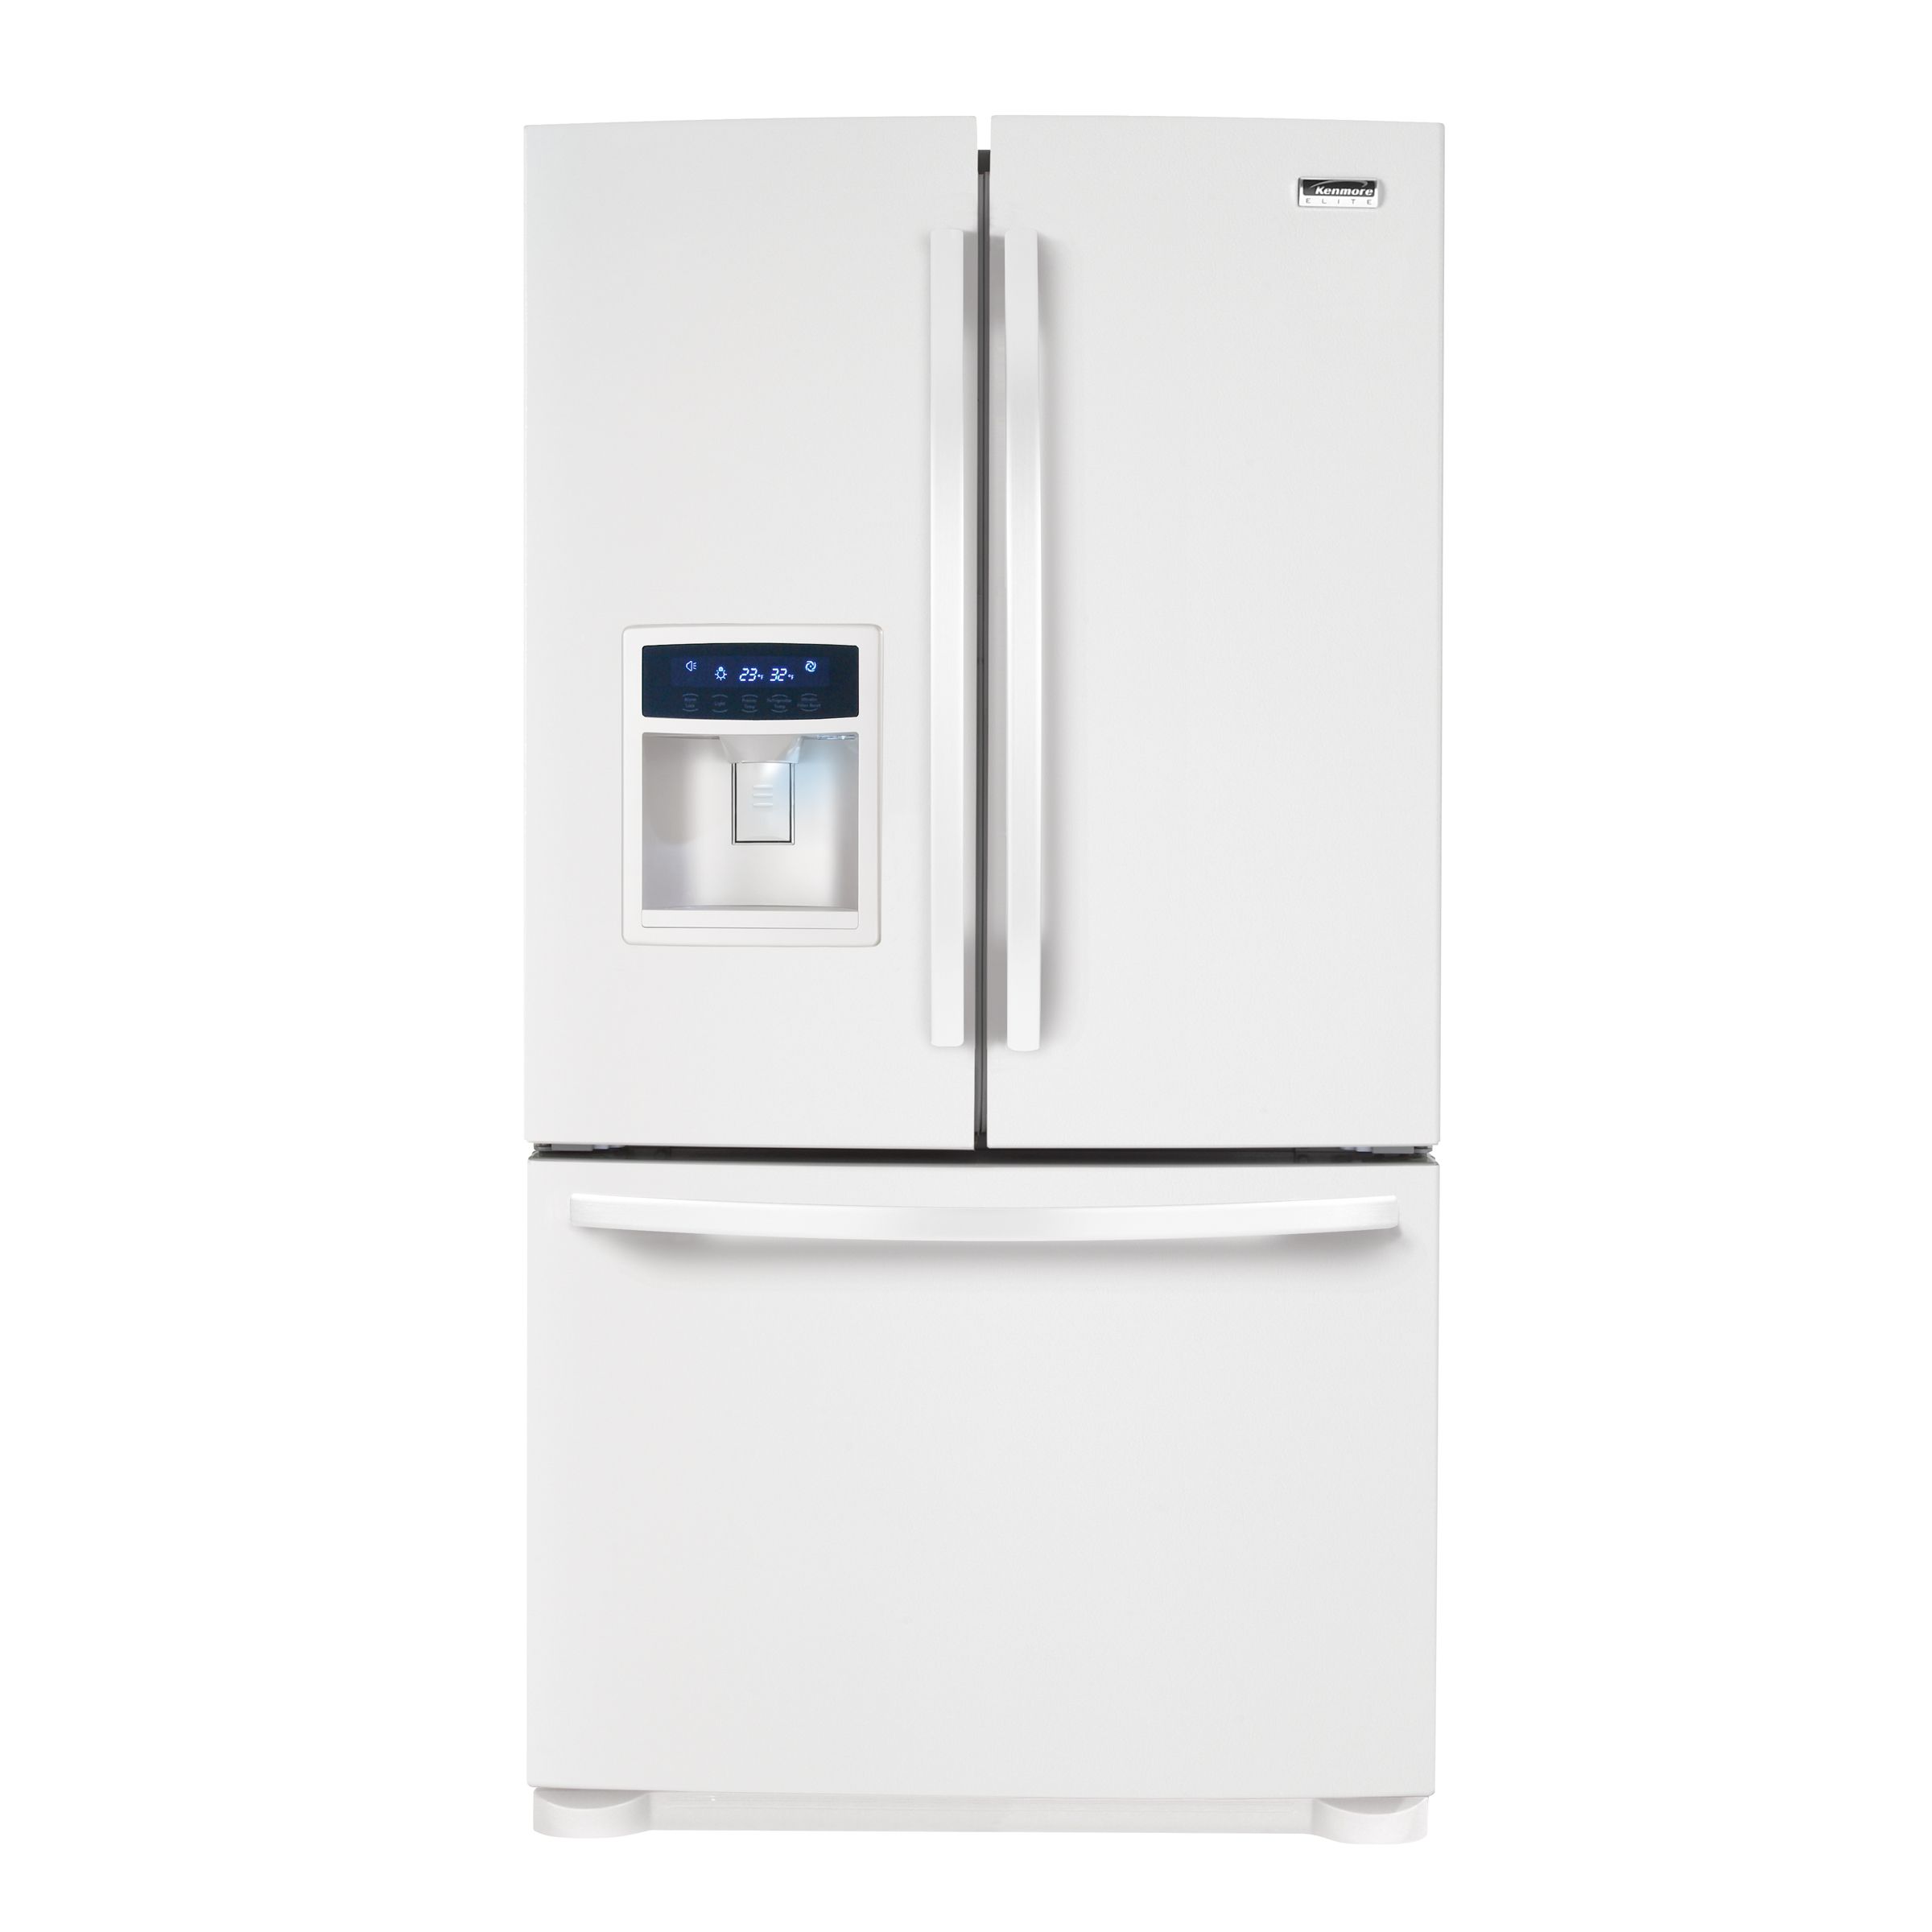 Kenmore Elite 25 cu. ft. French